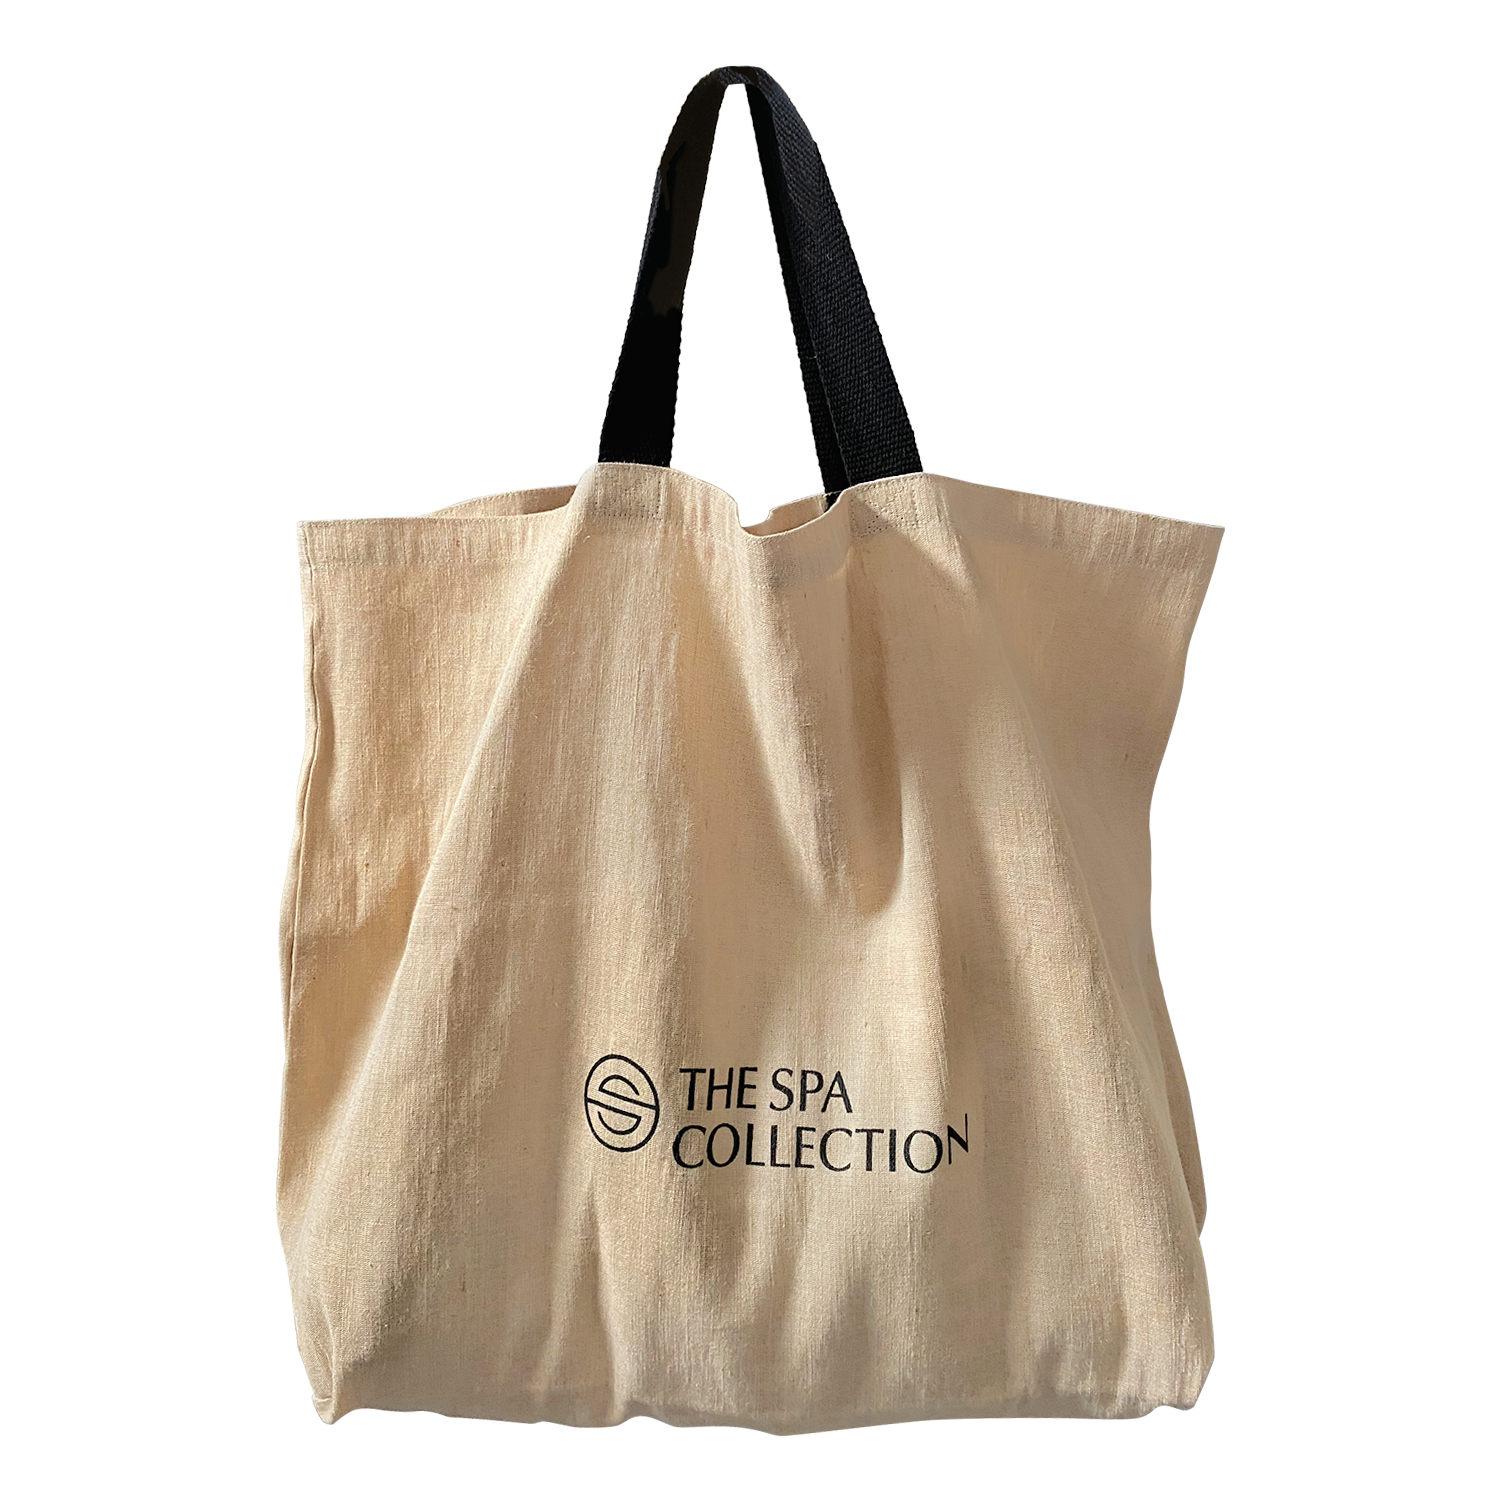 A beige, stylish and sustainable jute beach bag with The Spa Collection logo in black. Stylish and functional, eco-friendly bag.